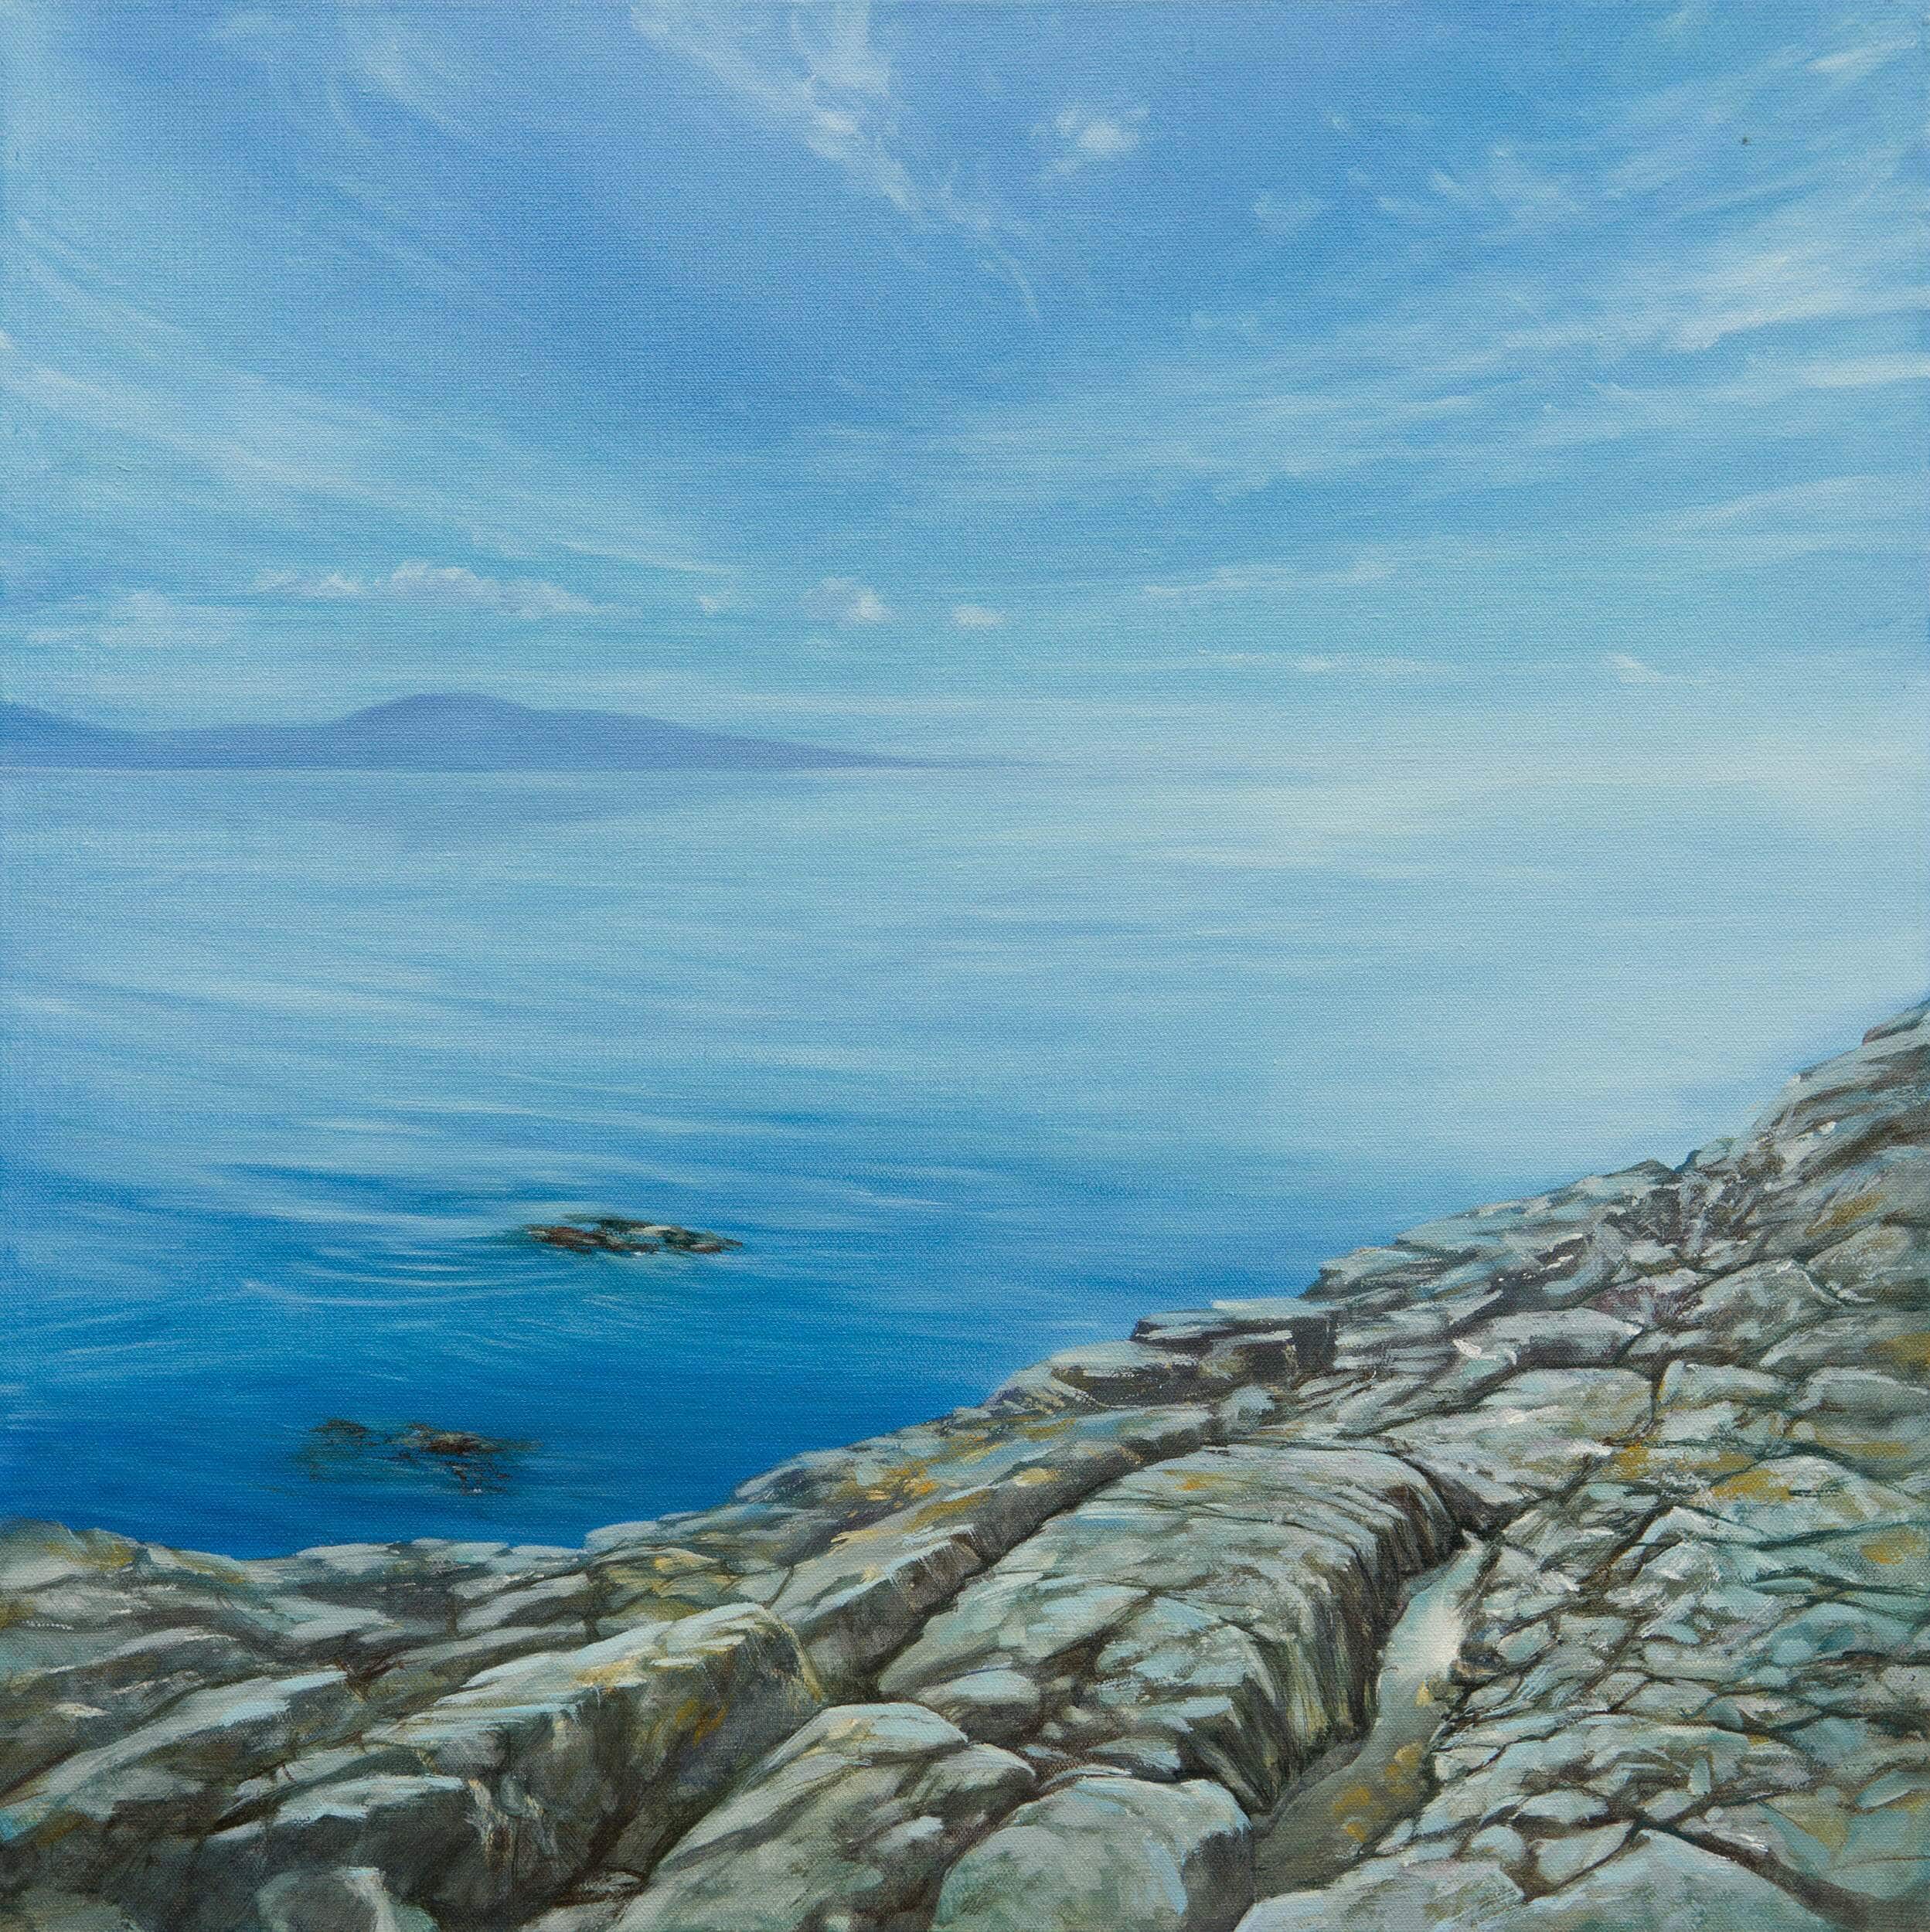 Contemporary Landscape Art. Title: Calm horizon, Oil on Canvas, 24 x 24 in by Canadian Artist Ananda Dhama.